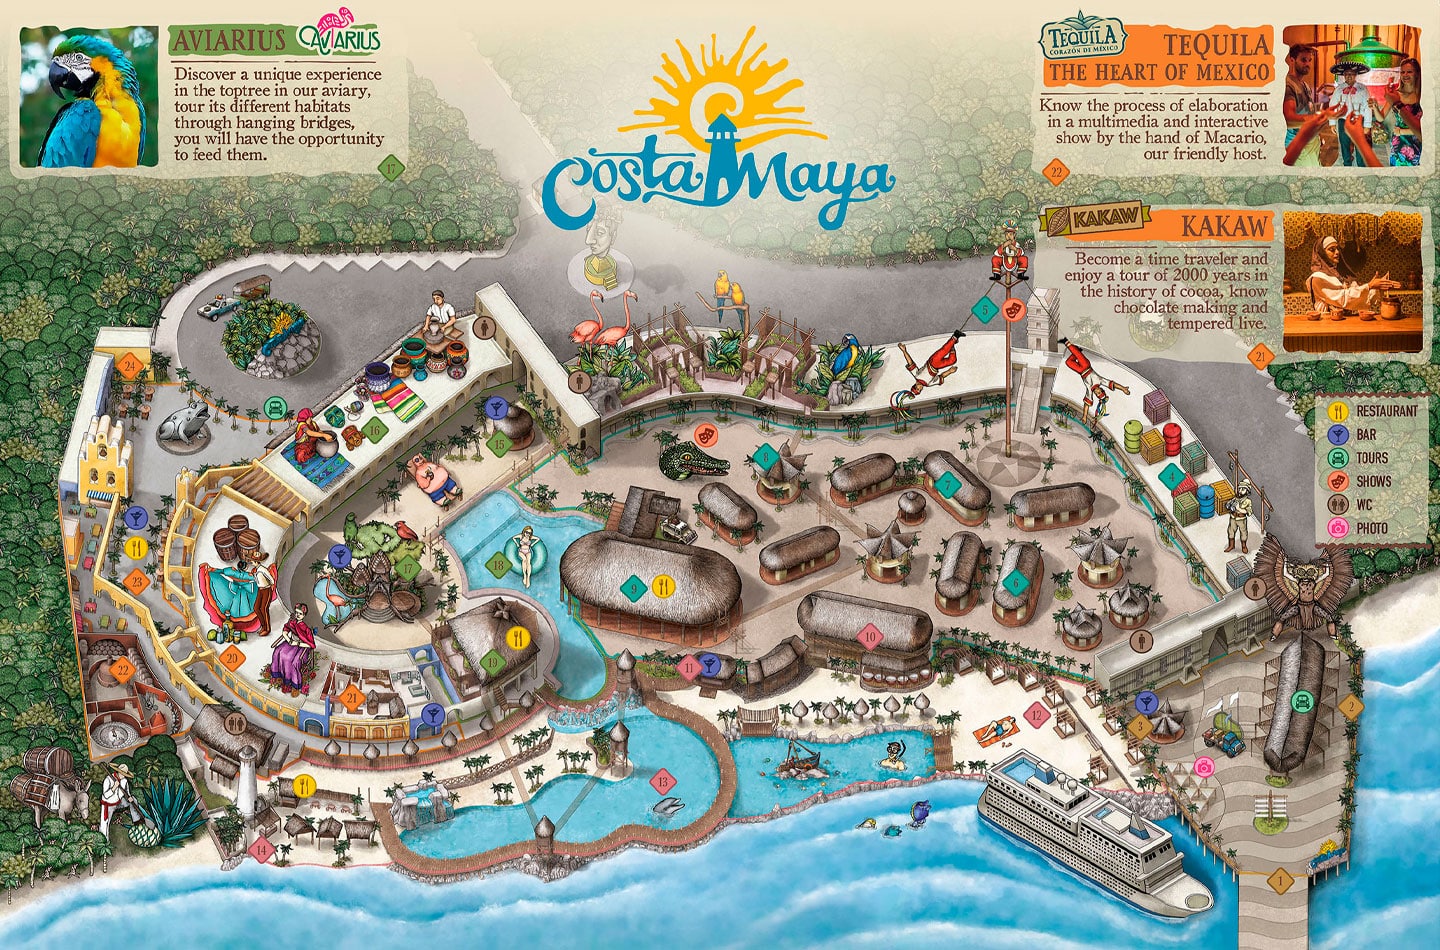 map of costa maya cruise port showing shops, main pool and excursion points